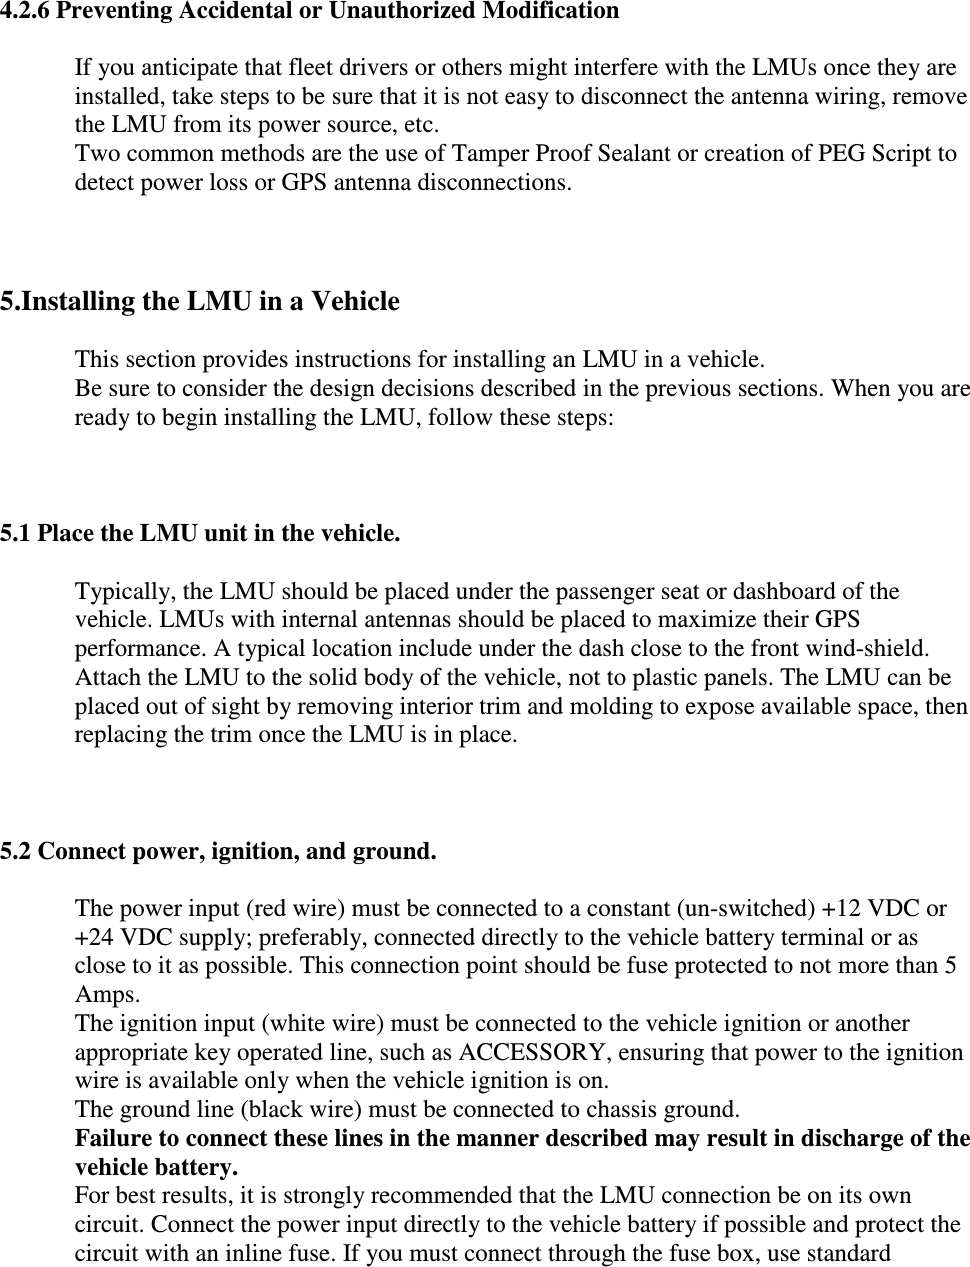  4.2.6 Preventing Accidental or Unauthorized Modification If you anticipate that fleet drivers or others might interfere with the LMUs once they are installed, take steps to be sure that it is not easy to disconnect the antenna wiring, remove the LMU from its power source, etc.  Two common methods are the use of Tamper Proof Sealant or creation of PEG Script to detect power loss or GPS antenna disconnections.   5.Installing the LMU in a Vehicle This section provides instructions for installing an LMU in a vehicle.  Be sure to consider the design decisions described in the previous sections. When you are ready to begin installing the LMU, follow these steps:   5.1 Place the LMU unit in the vehicle. Typically, the LMU should be placed under the passenger seat or dashboard of the vehicle. LMUs with internal antennas should be placed to maximize their GPS performance. A typical location include under the dash close to the front wind-shield.  Attach the LMU to the solid body of the vehicle, not to plastic panels. The LMU can be placed out of sight by removing interior trim and molding to expose available space, then replacing the trim once the LMU is in place.   5.2 Connect power, ignition, and ground. The power input (red wire) must be connected to a constant (un-switched) +12 VDC or +24 VDC supply; preferably, connected directly to the vehicle battery terminal or as close to it as possible. This connection point should be fuse protected to not more than 5 Amps.  The ignition input (white wire) must be connected to the vehicle ignition or another appropriate key operated line, such as ACCESSORY, ensuring that power to the ignition wire is available only when the vehicle ignition is on.  The ground line (black wire) must be connected to chassis ground.  Failure to connect these lines in the manner described may result in discharge of the vehicle battery. For best results, it is strongly recommended that the LMU connection be on its own circuit. Connect the power input directly to the vehicle battery if possible and protect the circuit with an inline fuse. If you must connect through the fuse box, use standard 